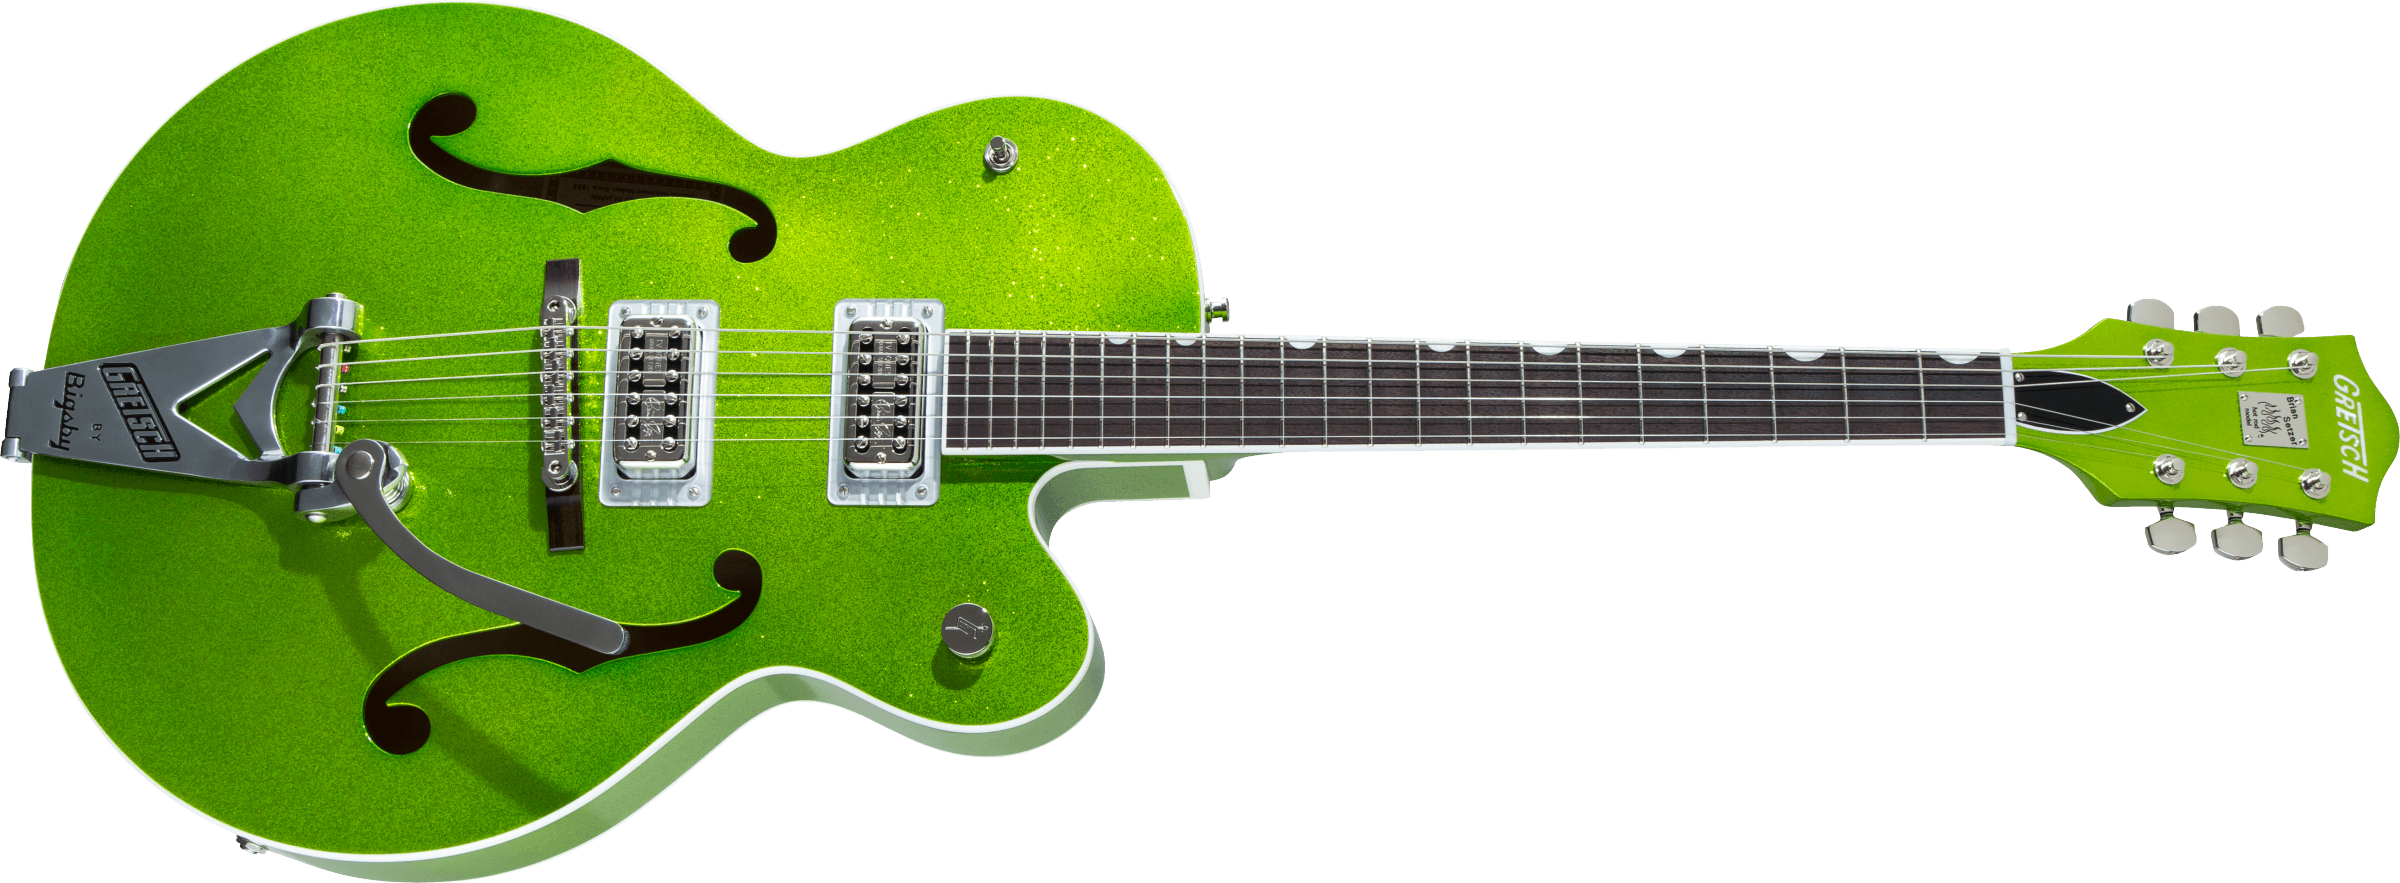 G6120T-HR Brian Setzer Signature Hot Rod Hollow Body with Bigsby, Rosewood Fingerboard, Extreme Coolant Green Sparkle追加画像